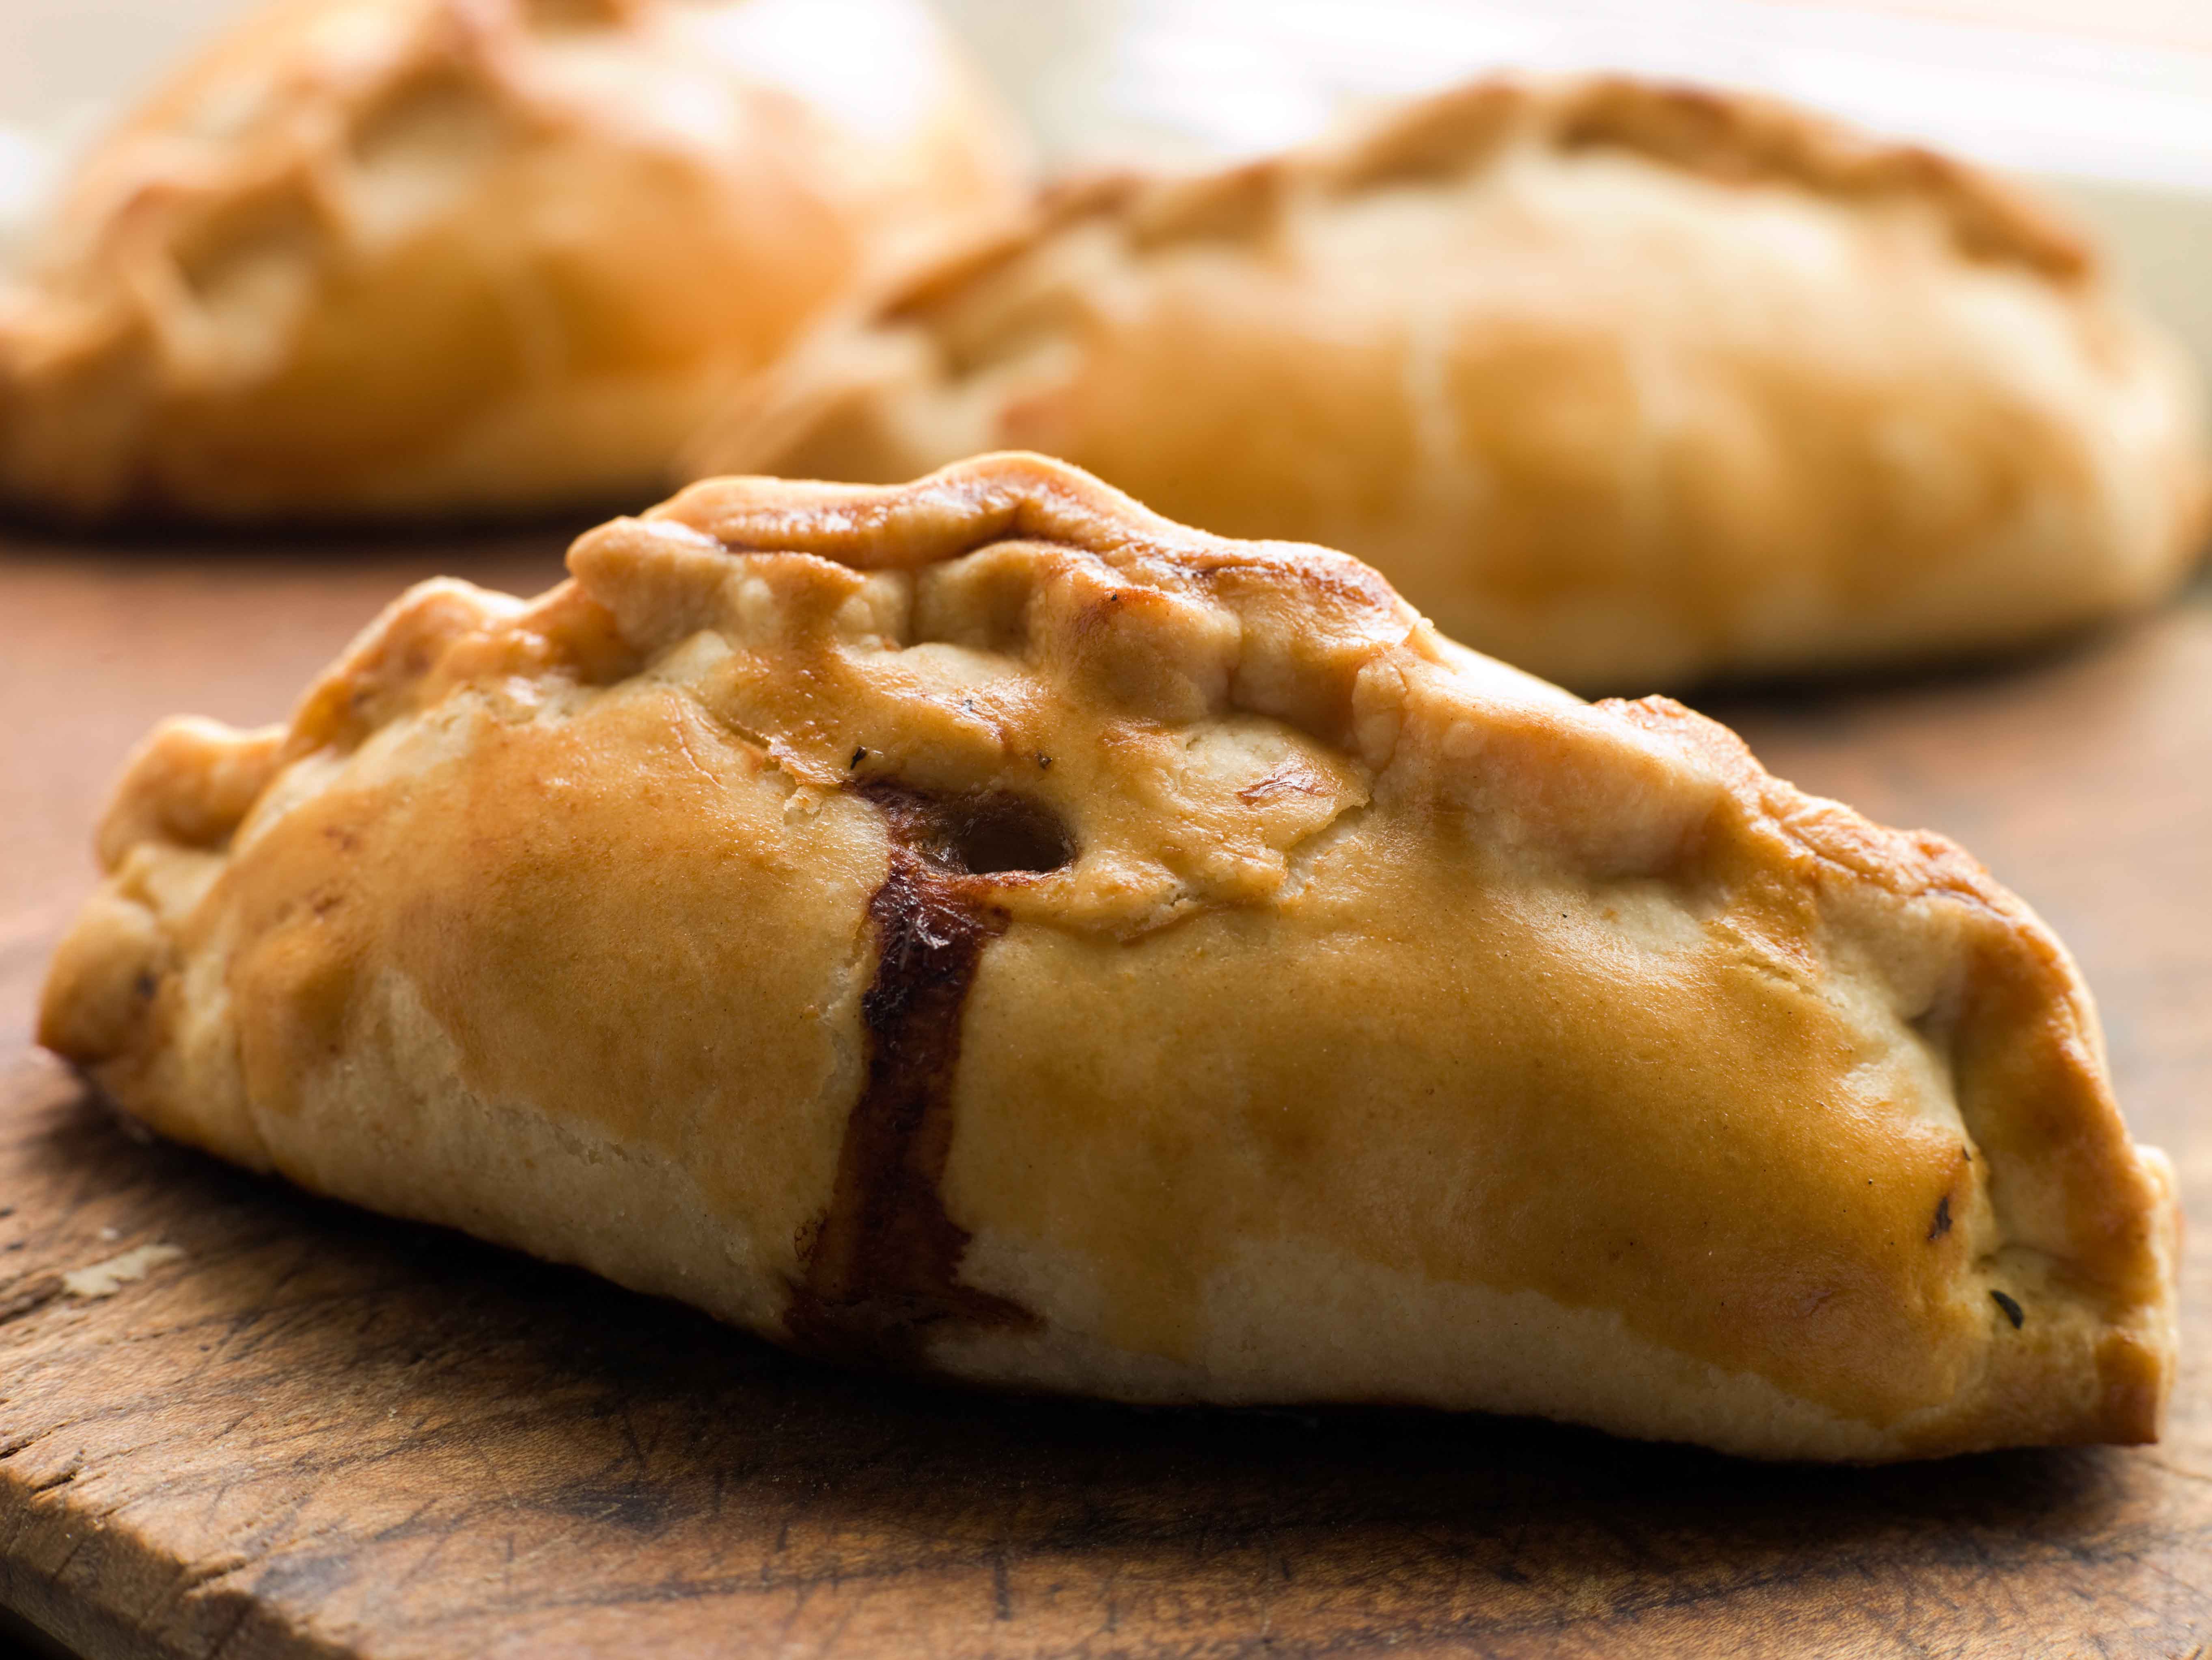 A traditional Cornish Pasty